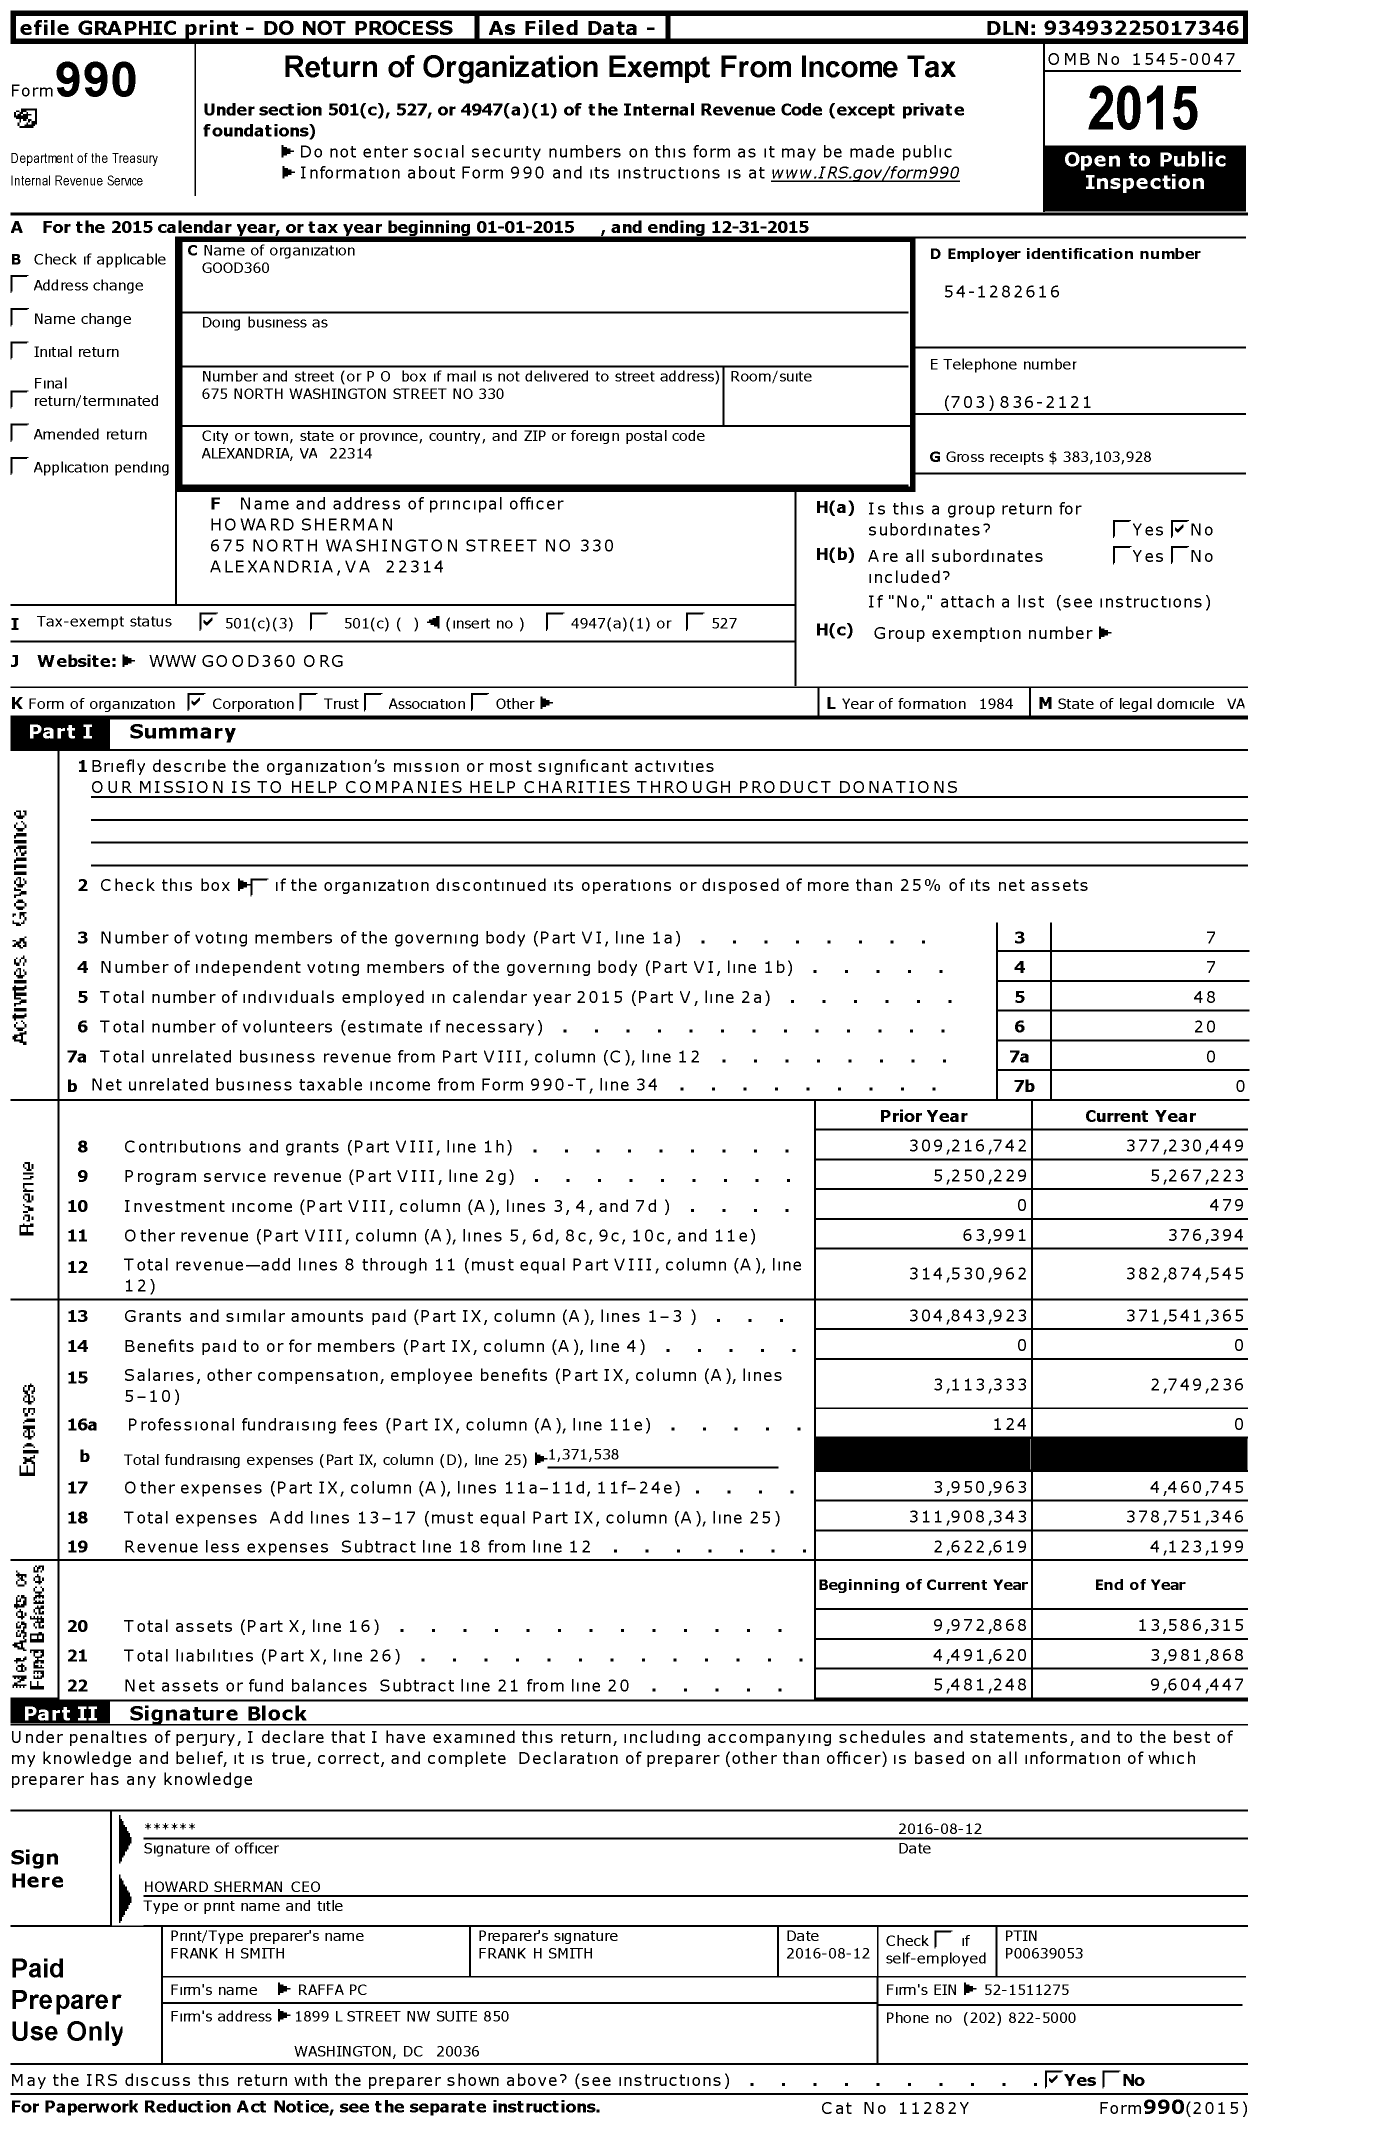 Image of first page of 2015 Form 990 for Good360